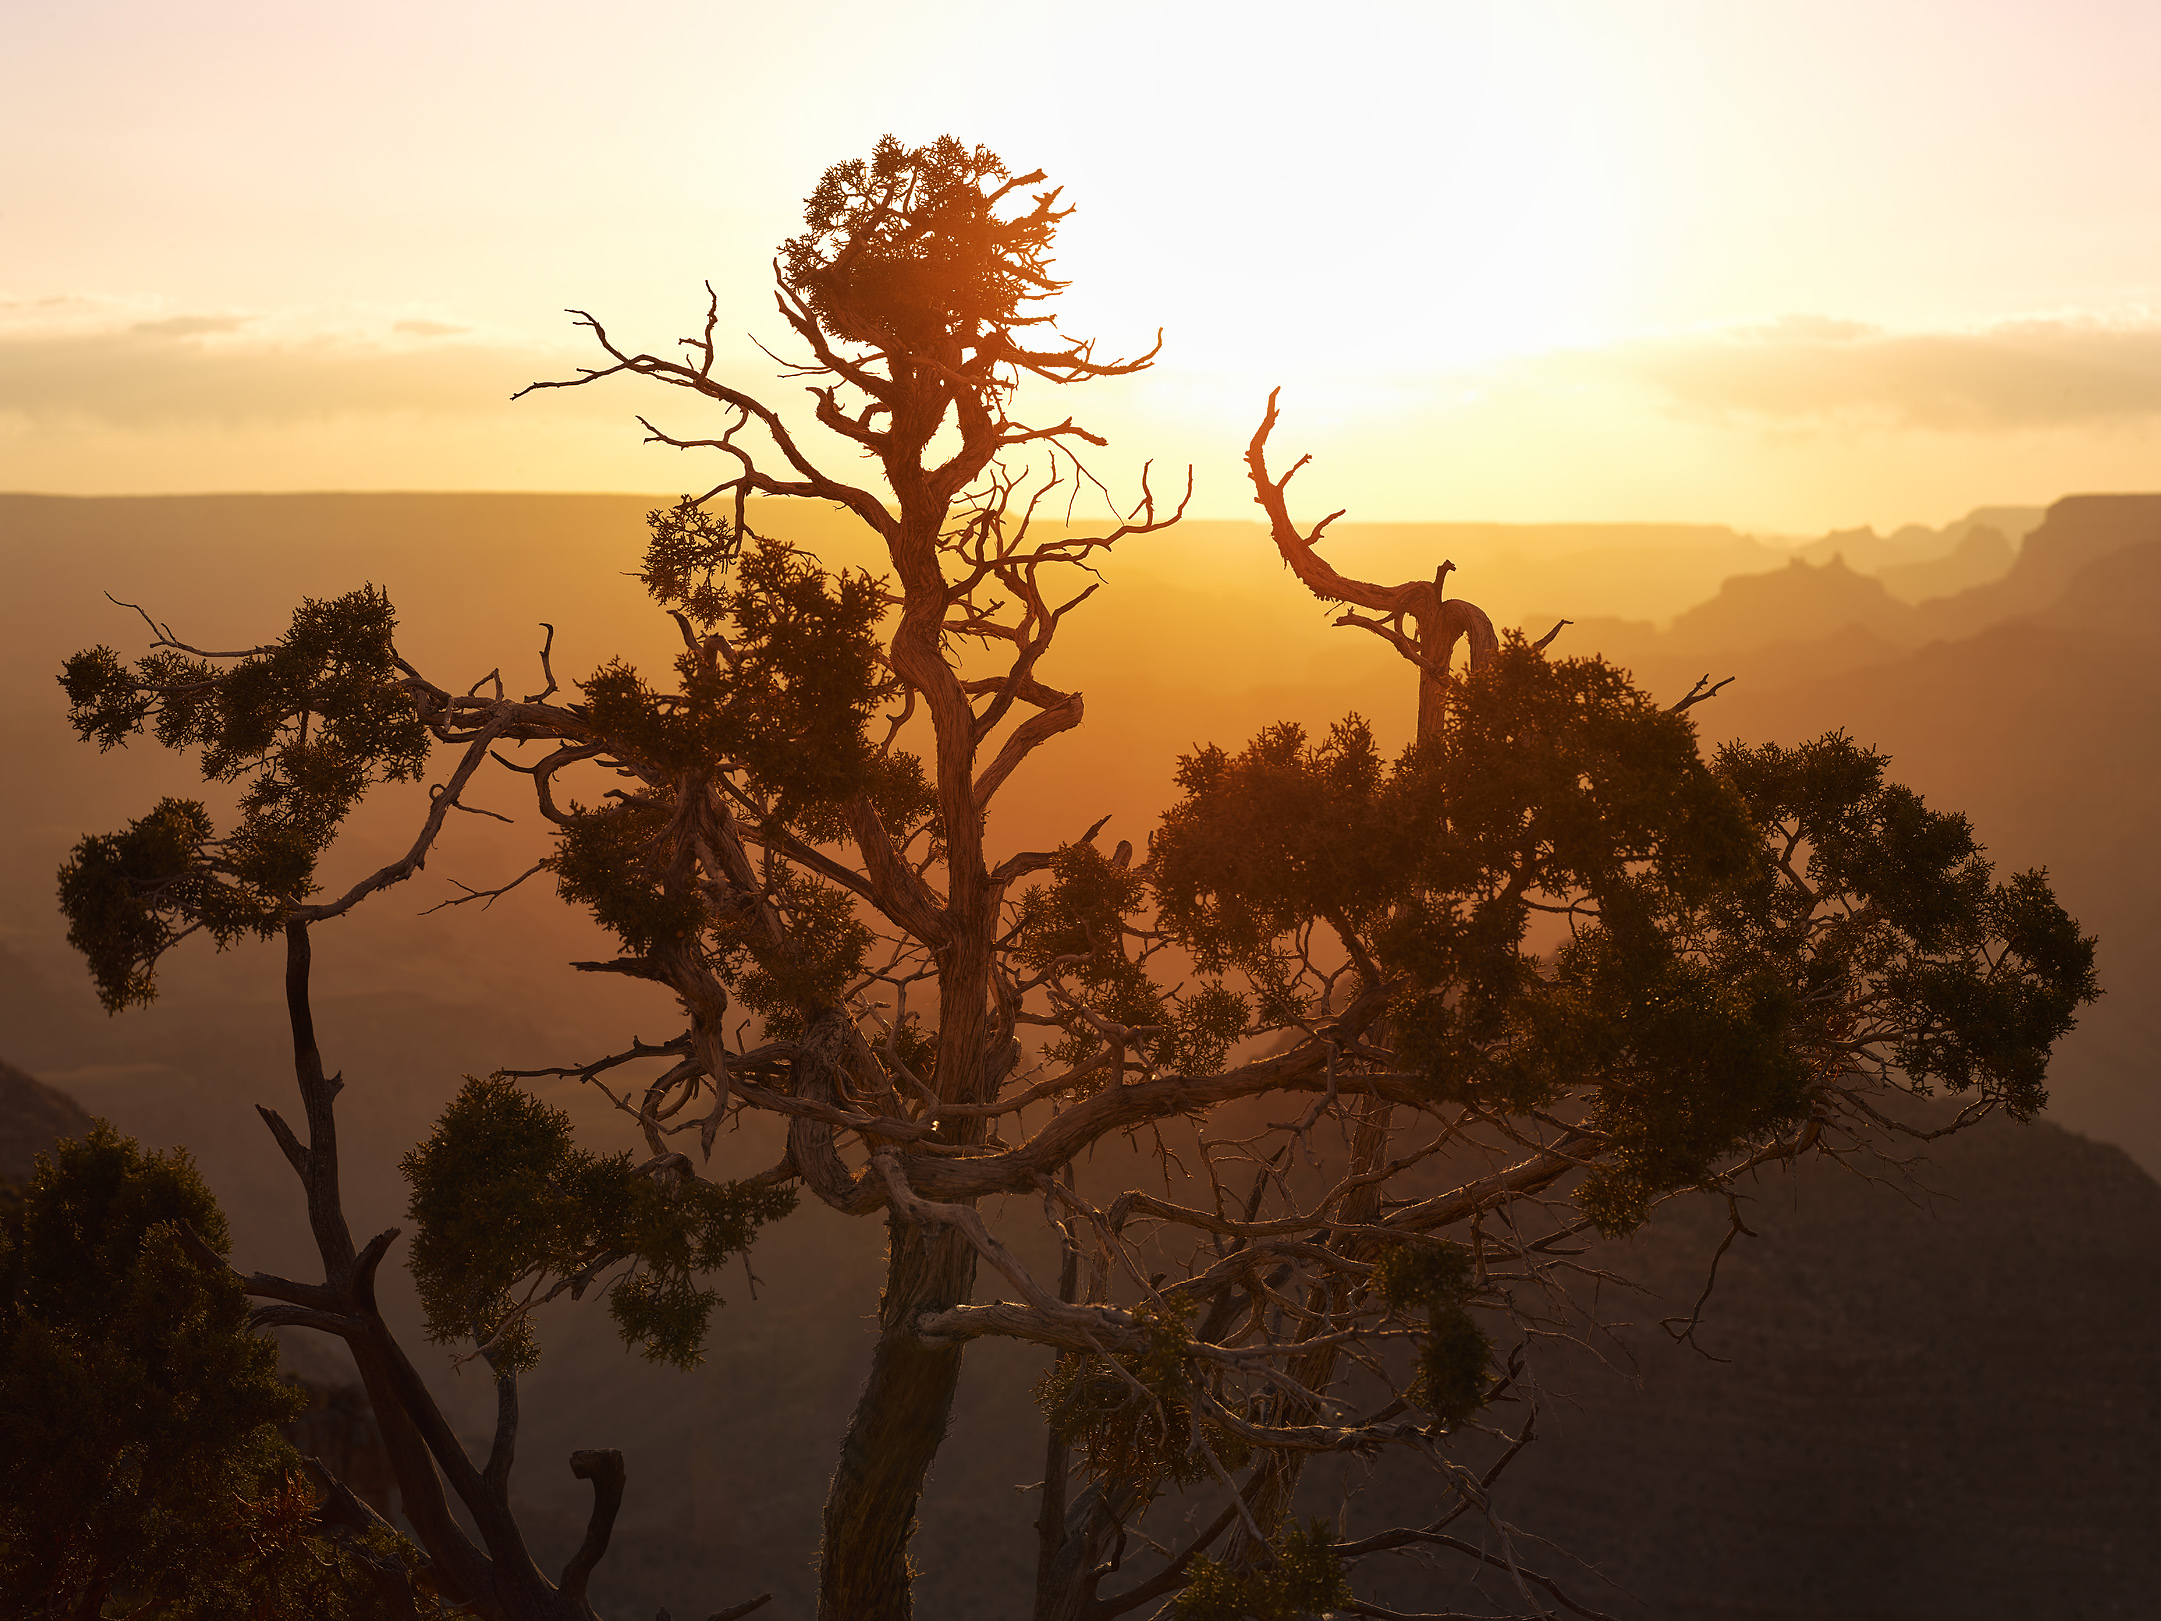 photo of a juniper tree at sunset at the grand canyon arizona. Arizona landscape photography by Travis Neely